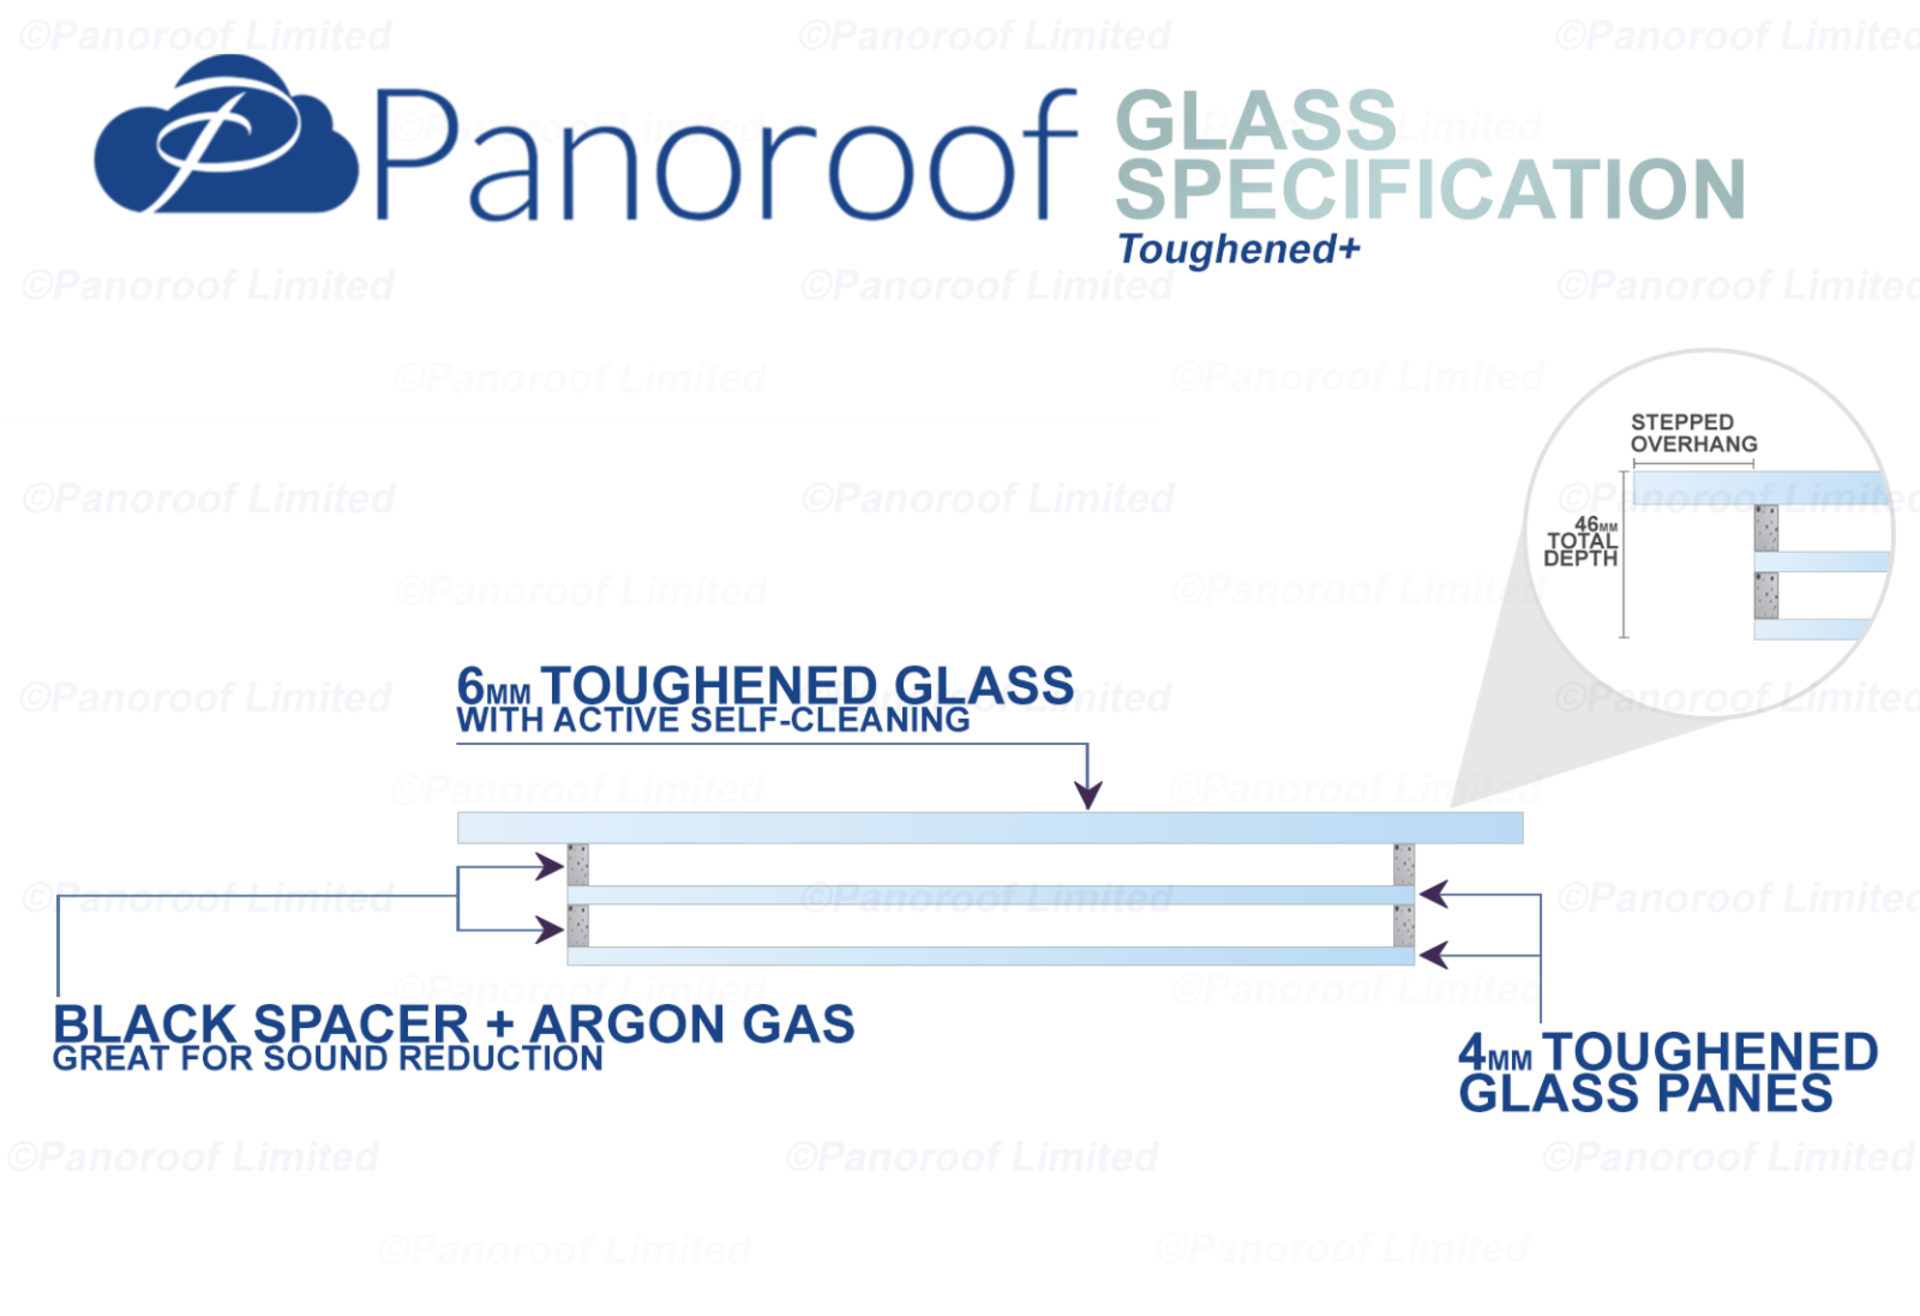 """Panoroof Triple Glazed Self Cleaning 800x2500mm (inside Size Visable glass area) Seamless Glass - Image 5 of 6